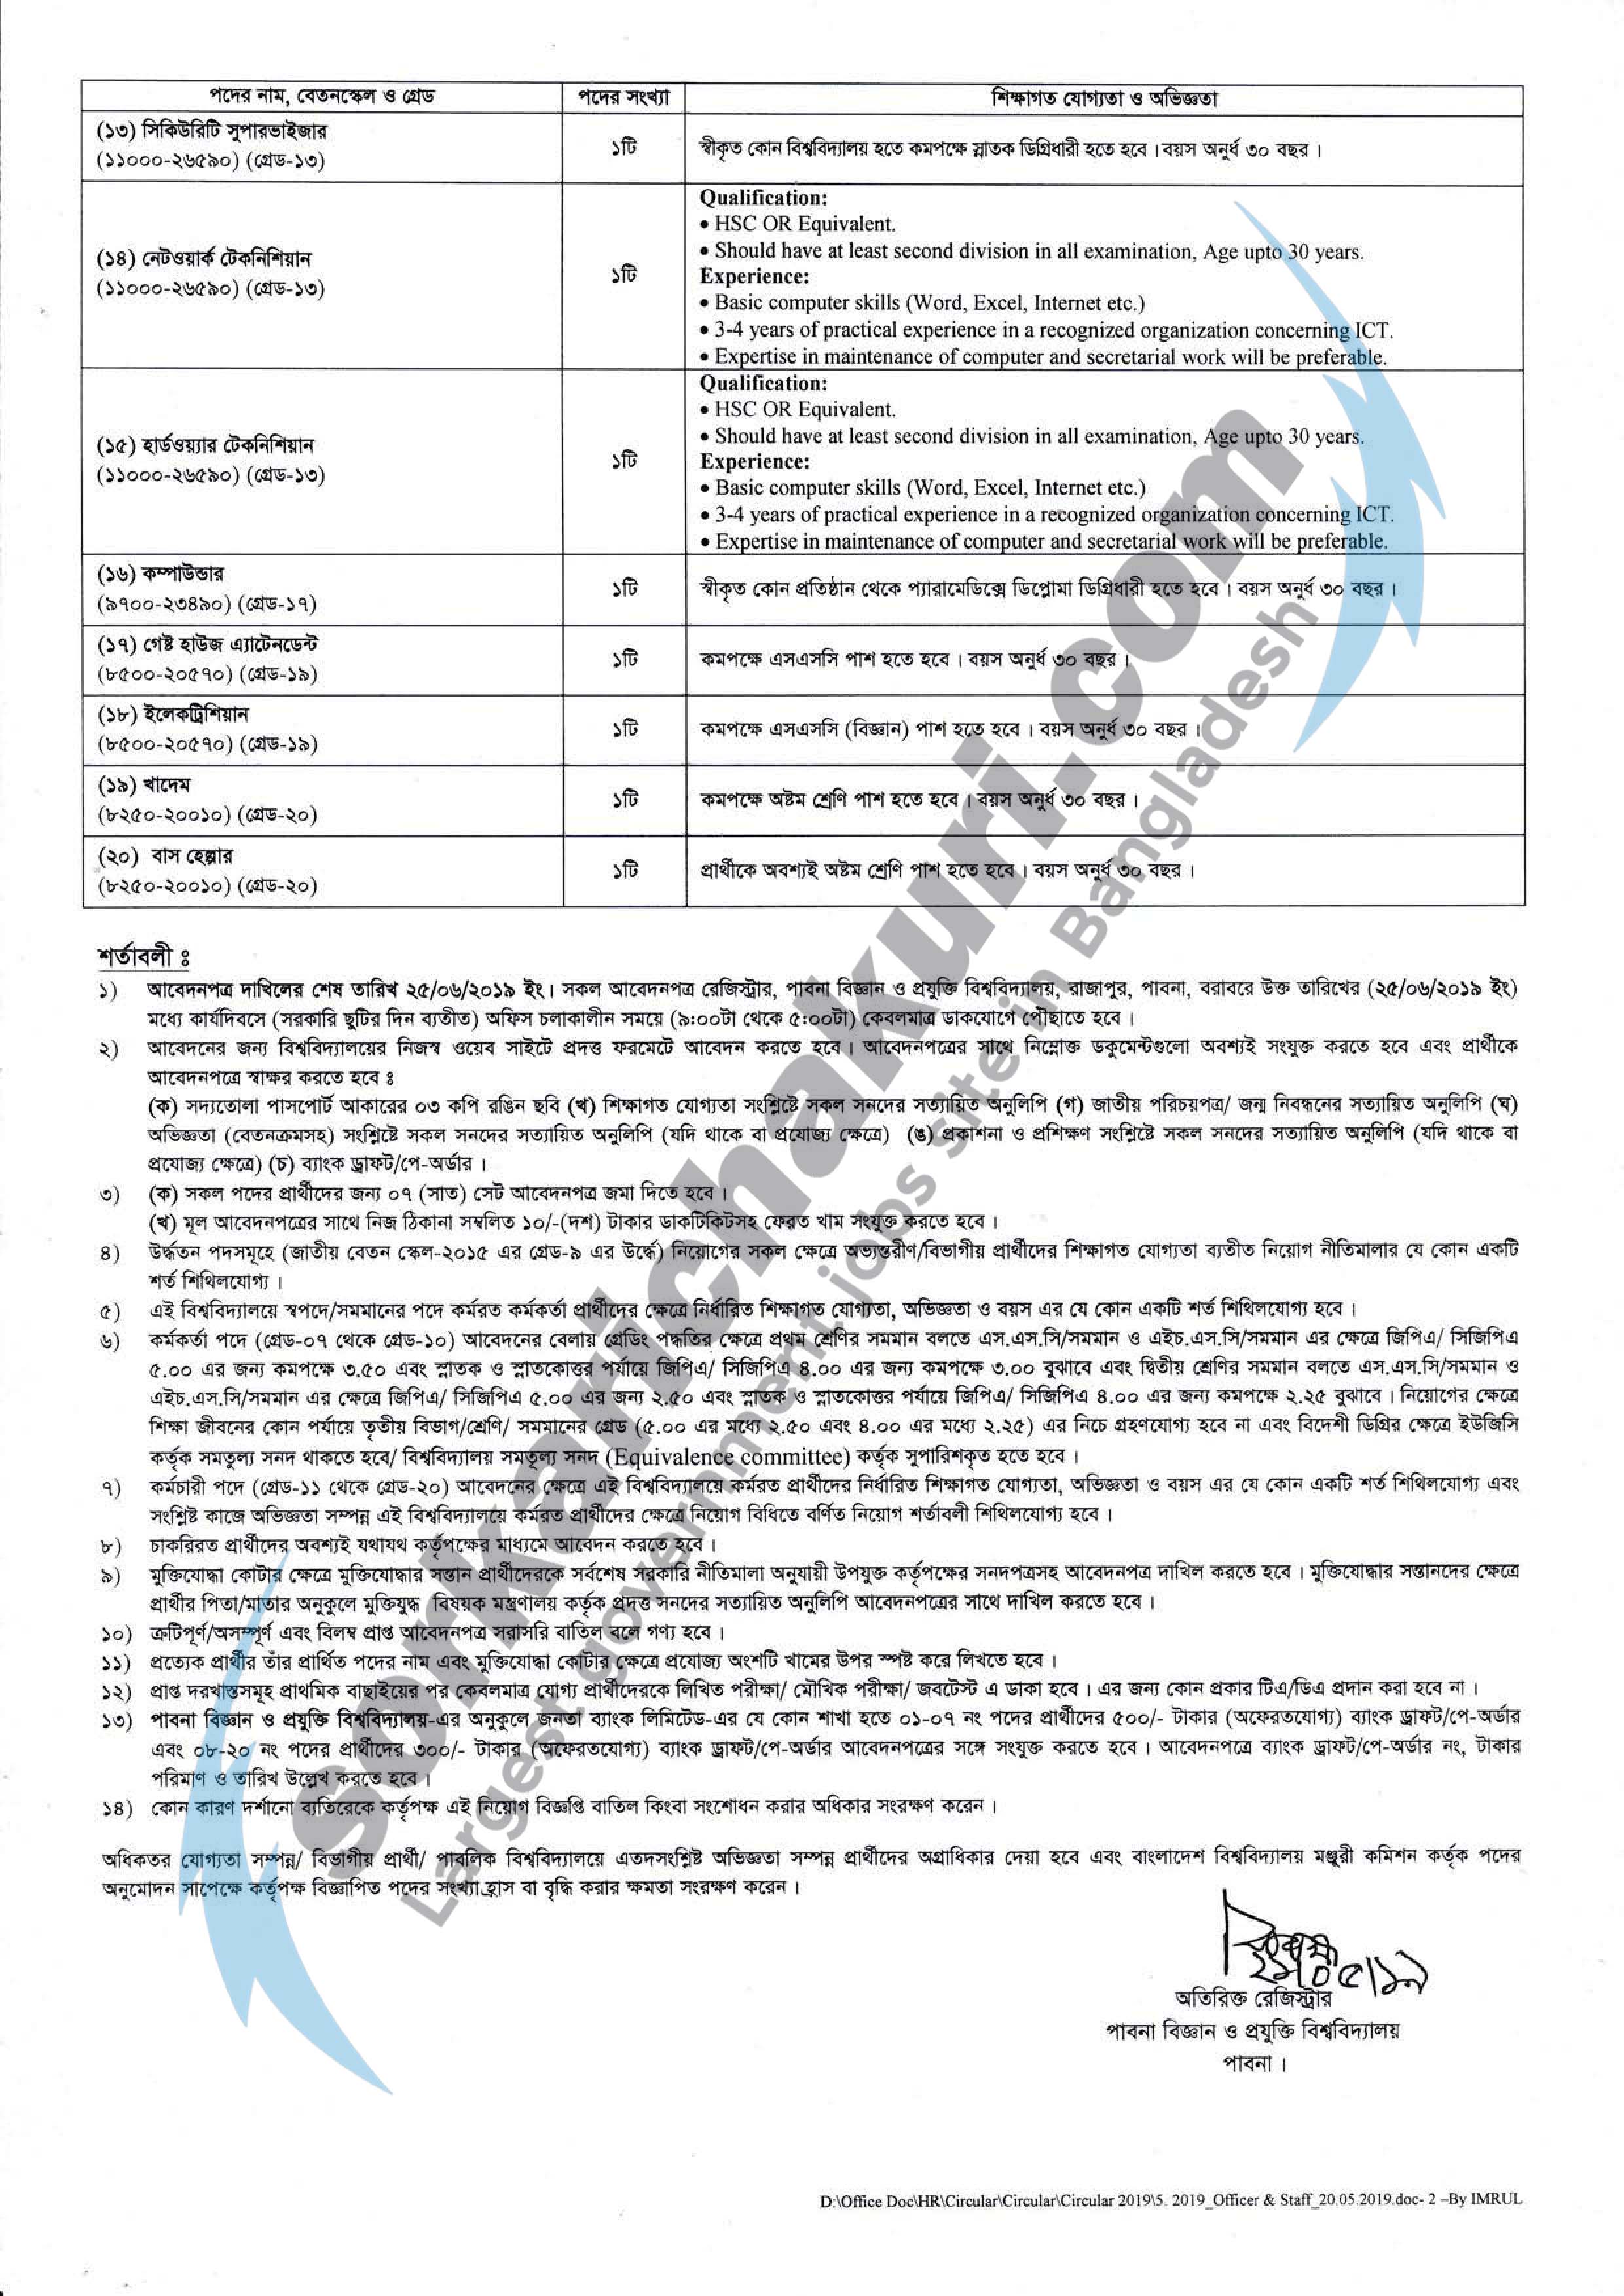 Pabna University of Science and Technology Jobs Circular 2019